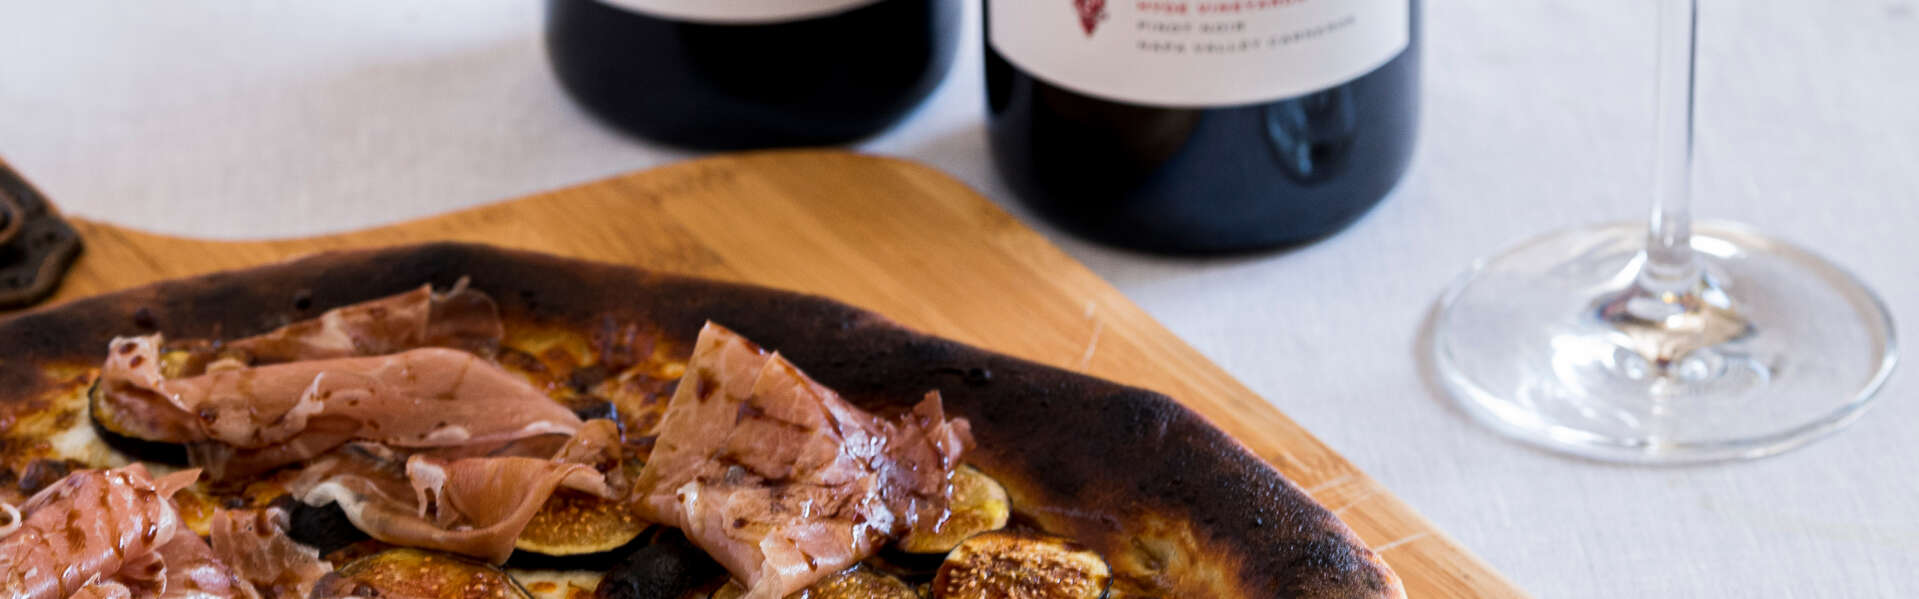 Davies Vineyards Pinots paired with Fig and Prosciutto Pizza with Balsamic Drizzle